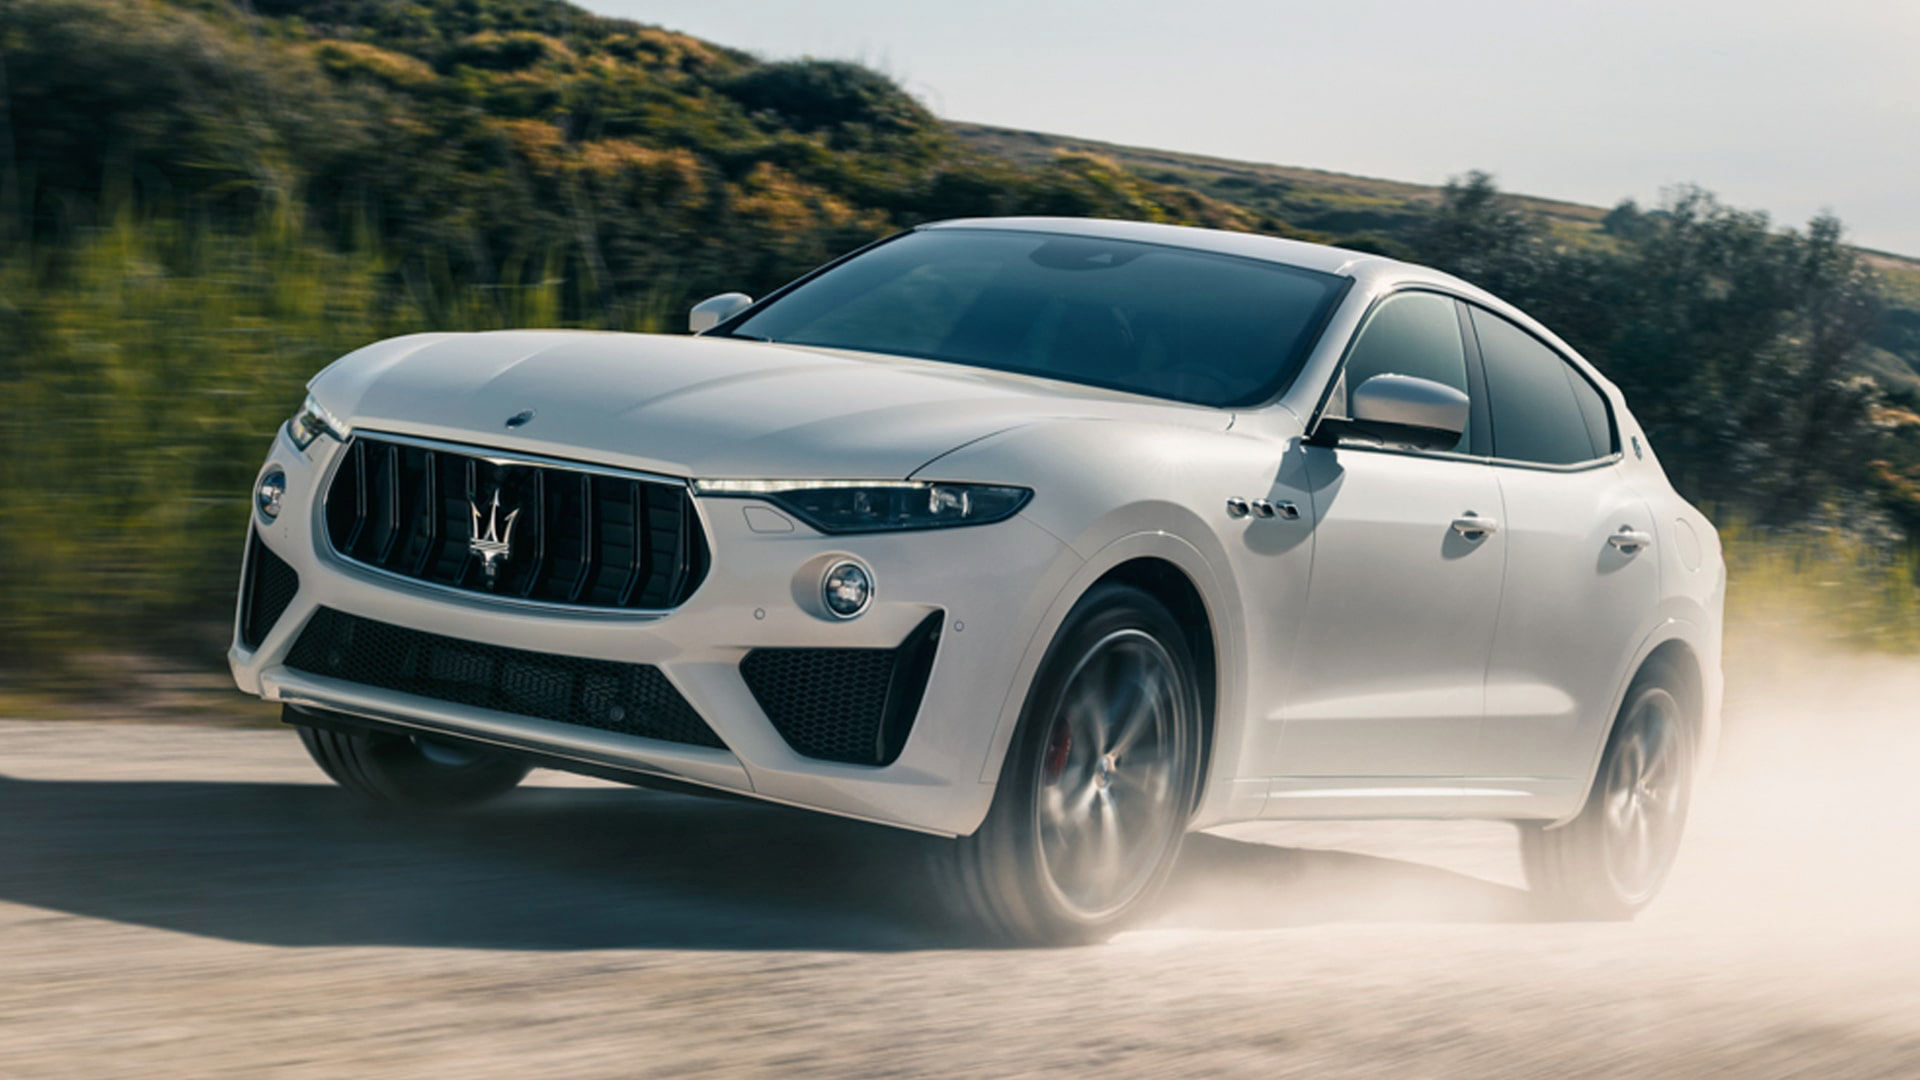 Maserati Levante on a gravel road, front and side view - off-roading